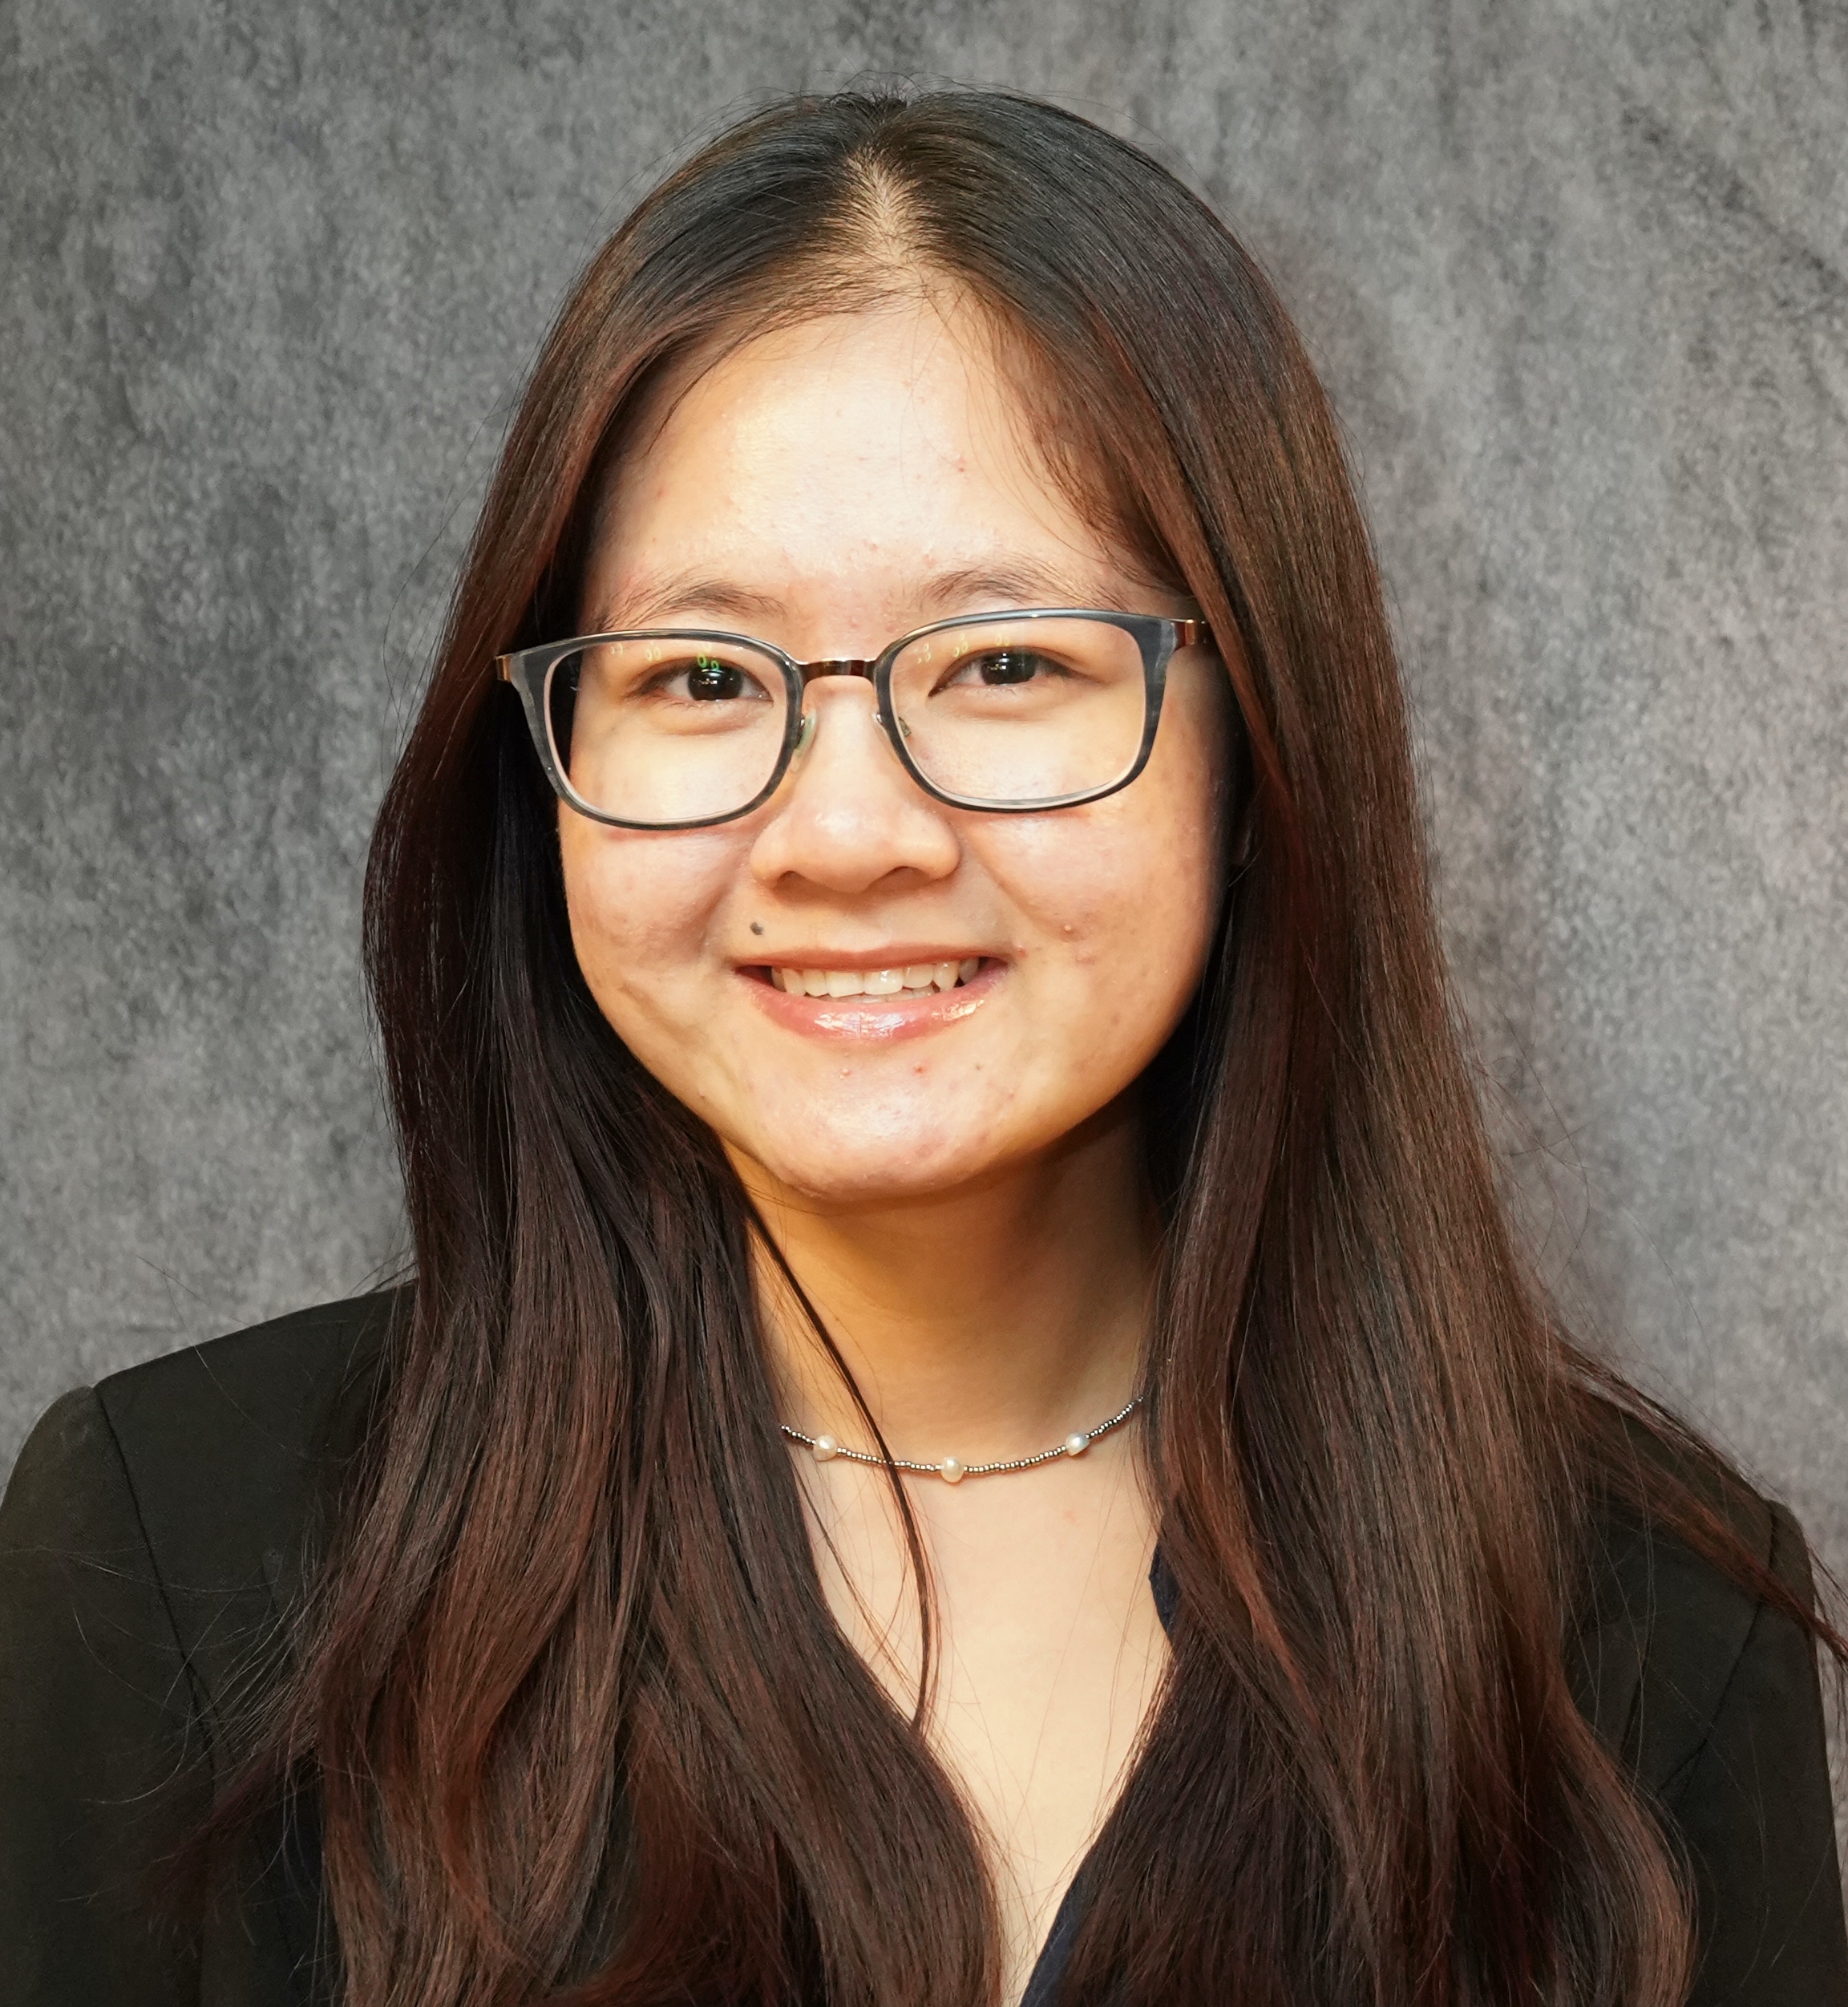 Sokuntheary Heang SHE-CAN scholar Gettysburg College